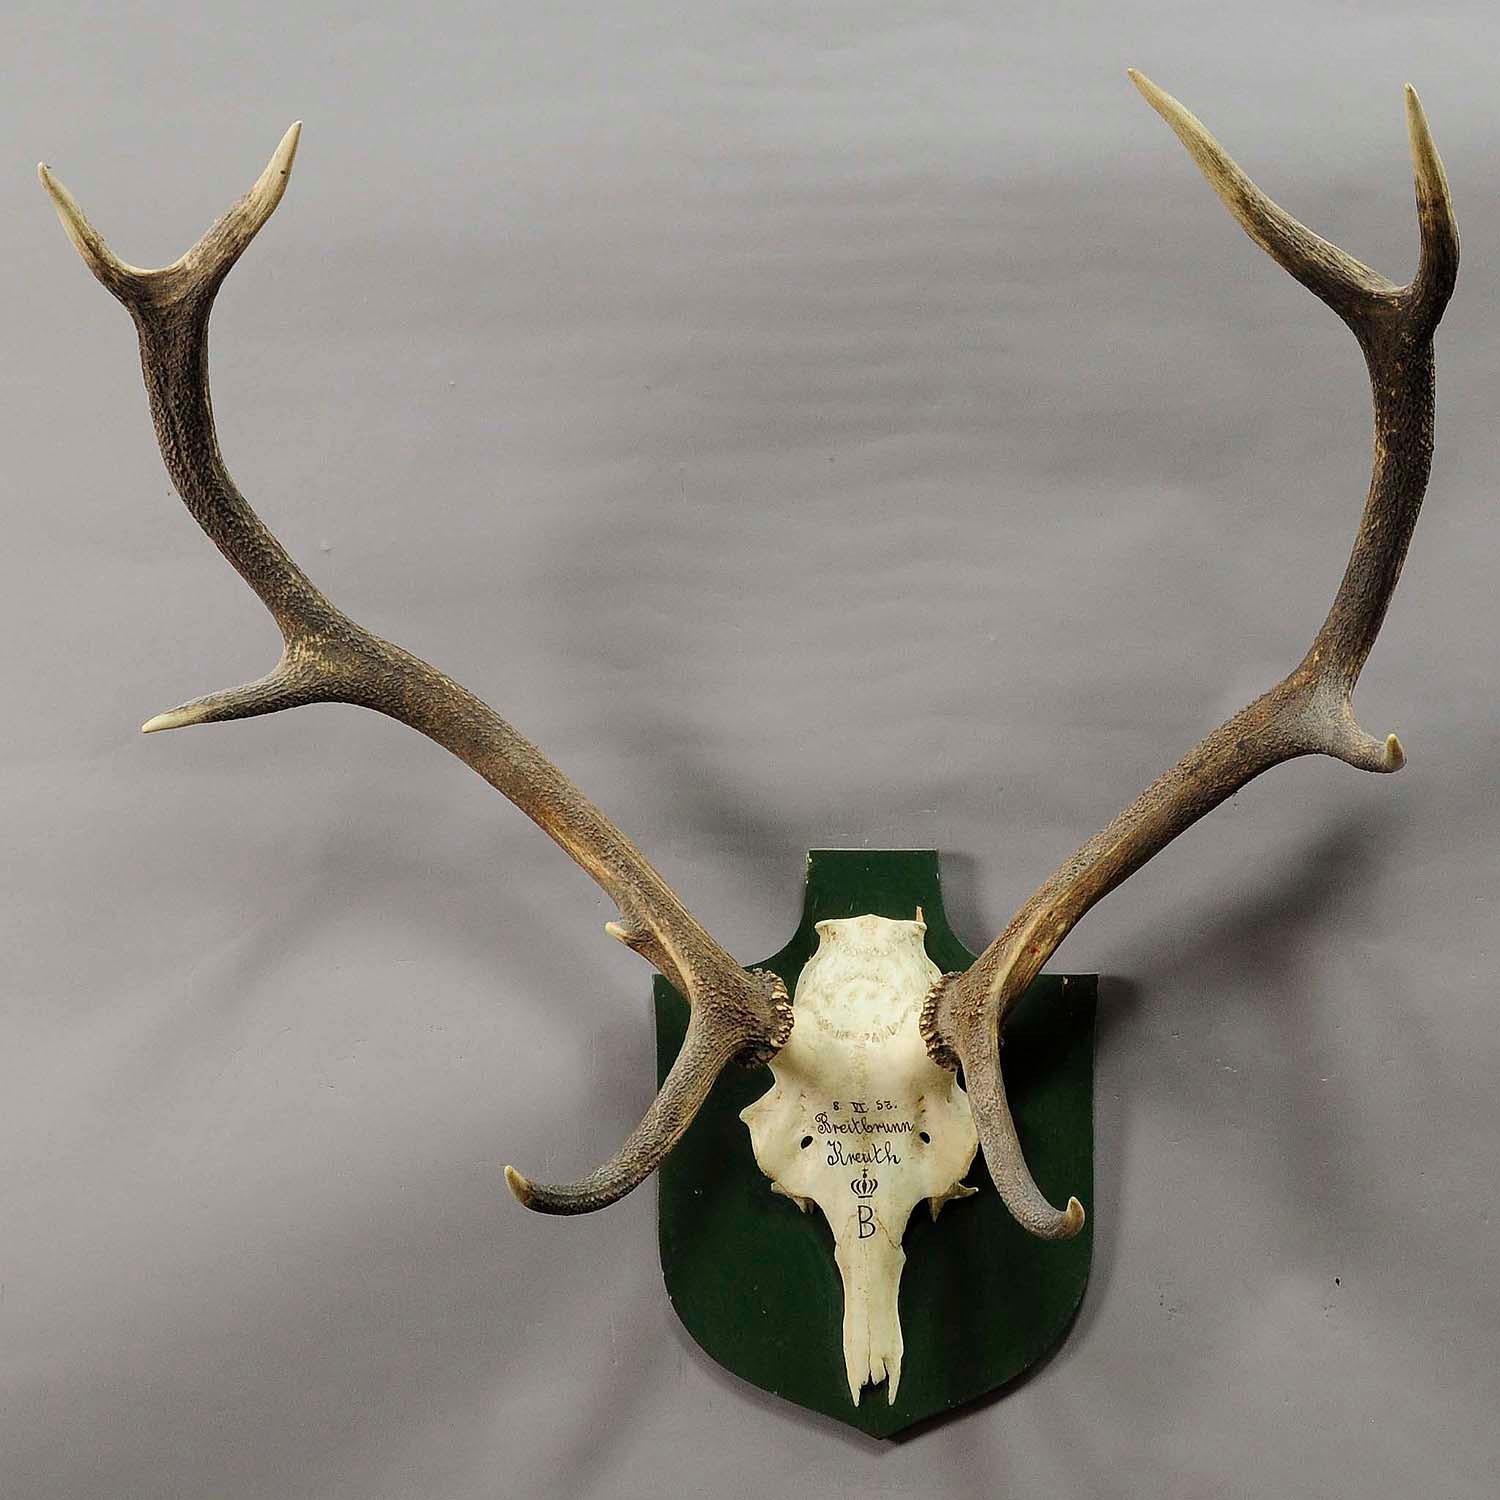 A great 12 pointer Black Forest deer trophy from the palace of Salem in south Germany. Shoot by a member of the lordly family of Badenin, 1957. Handwritten inscriptions on the skull with, place of the hunt and date 1957. Mounted on a wooden plaque,